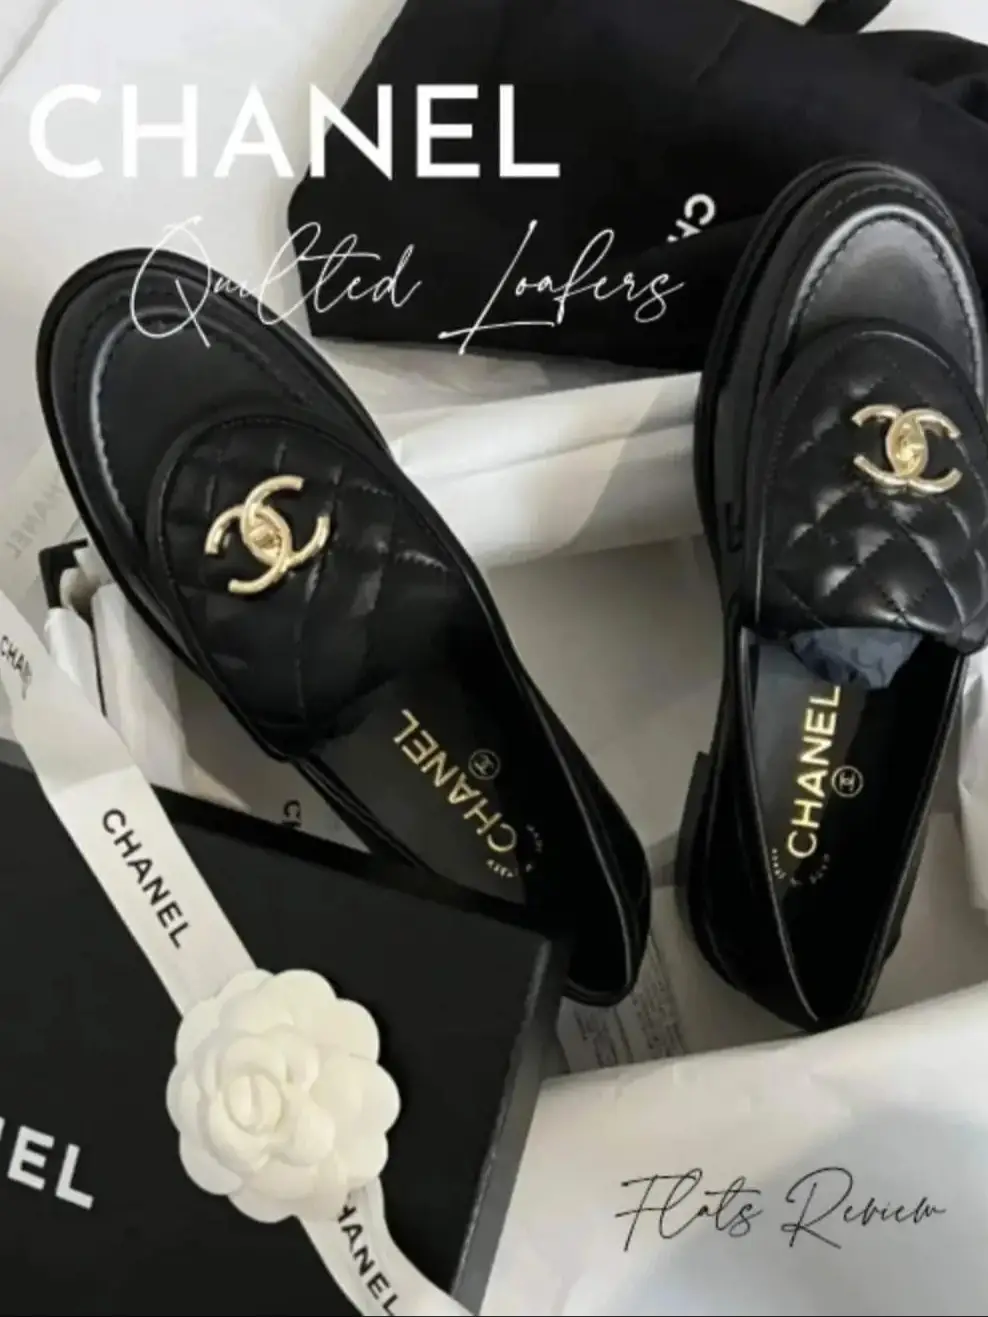 Chanel Quilted Tab Loafers Grey Leather